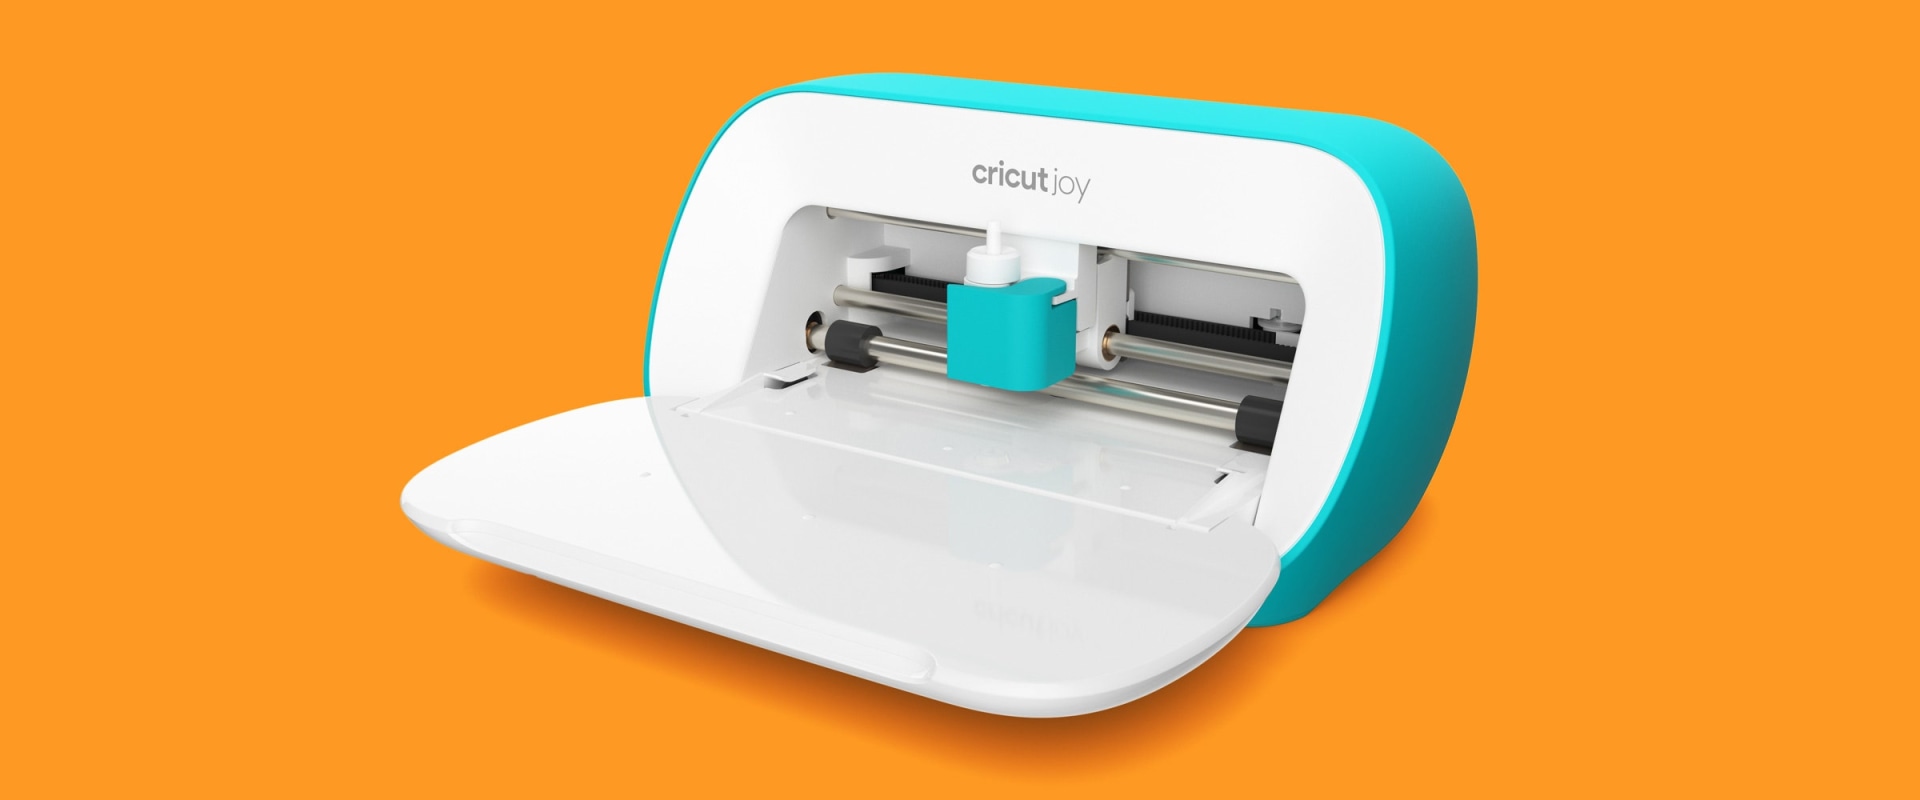 What is the Best Cricut Machine for Crafting?